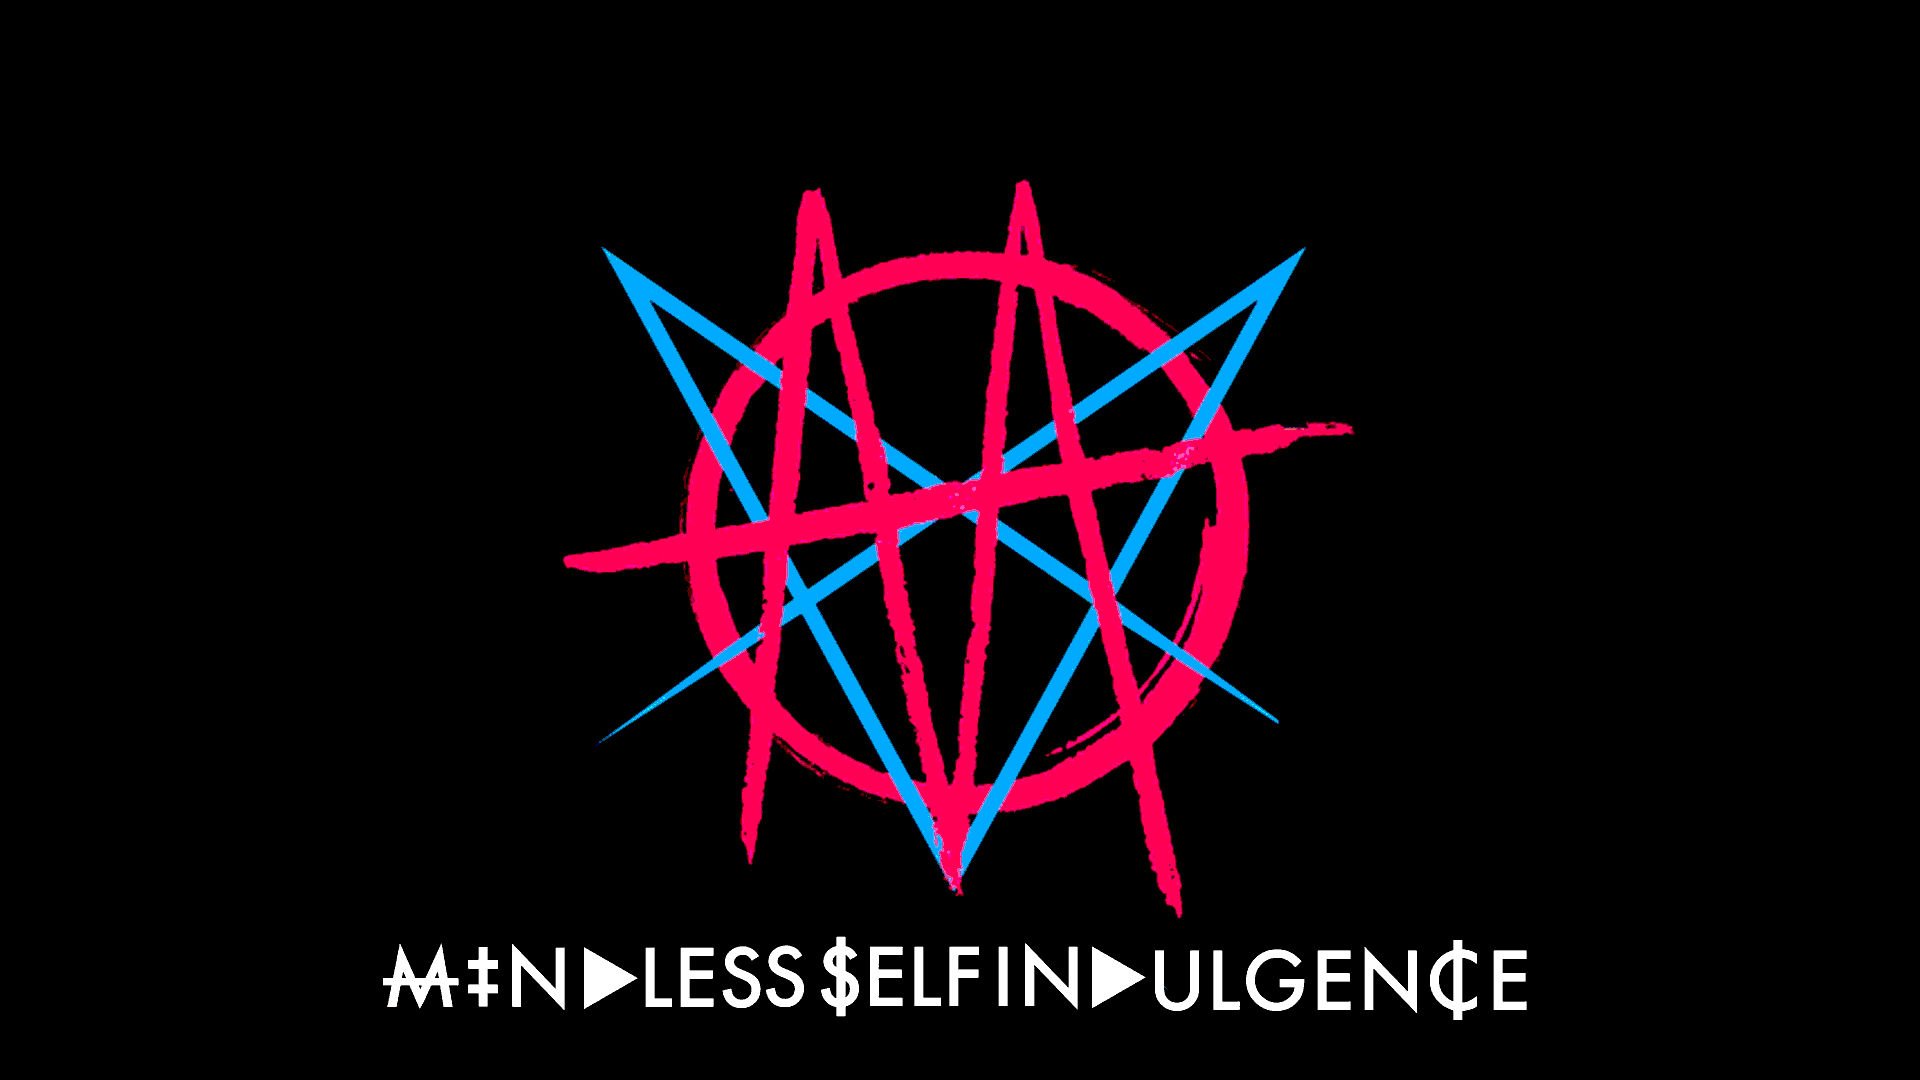 mindless, Self, Indulgence, Msi, Synthpunk, Industrial, Rock, Electronic, Hip, Hop, New, Wave Wallpaper